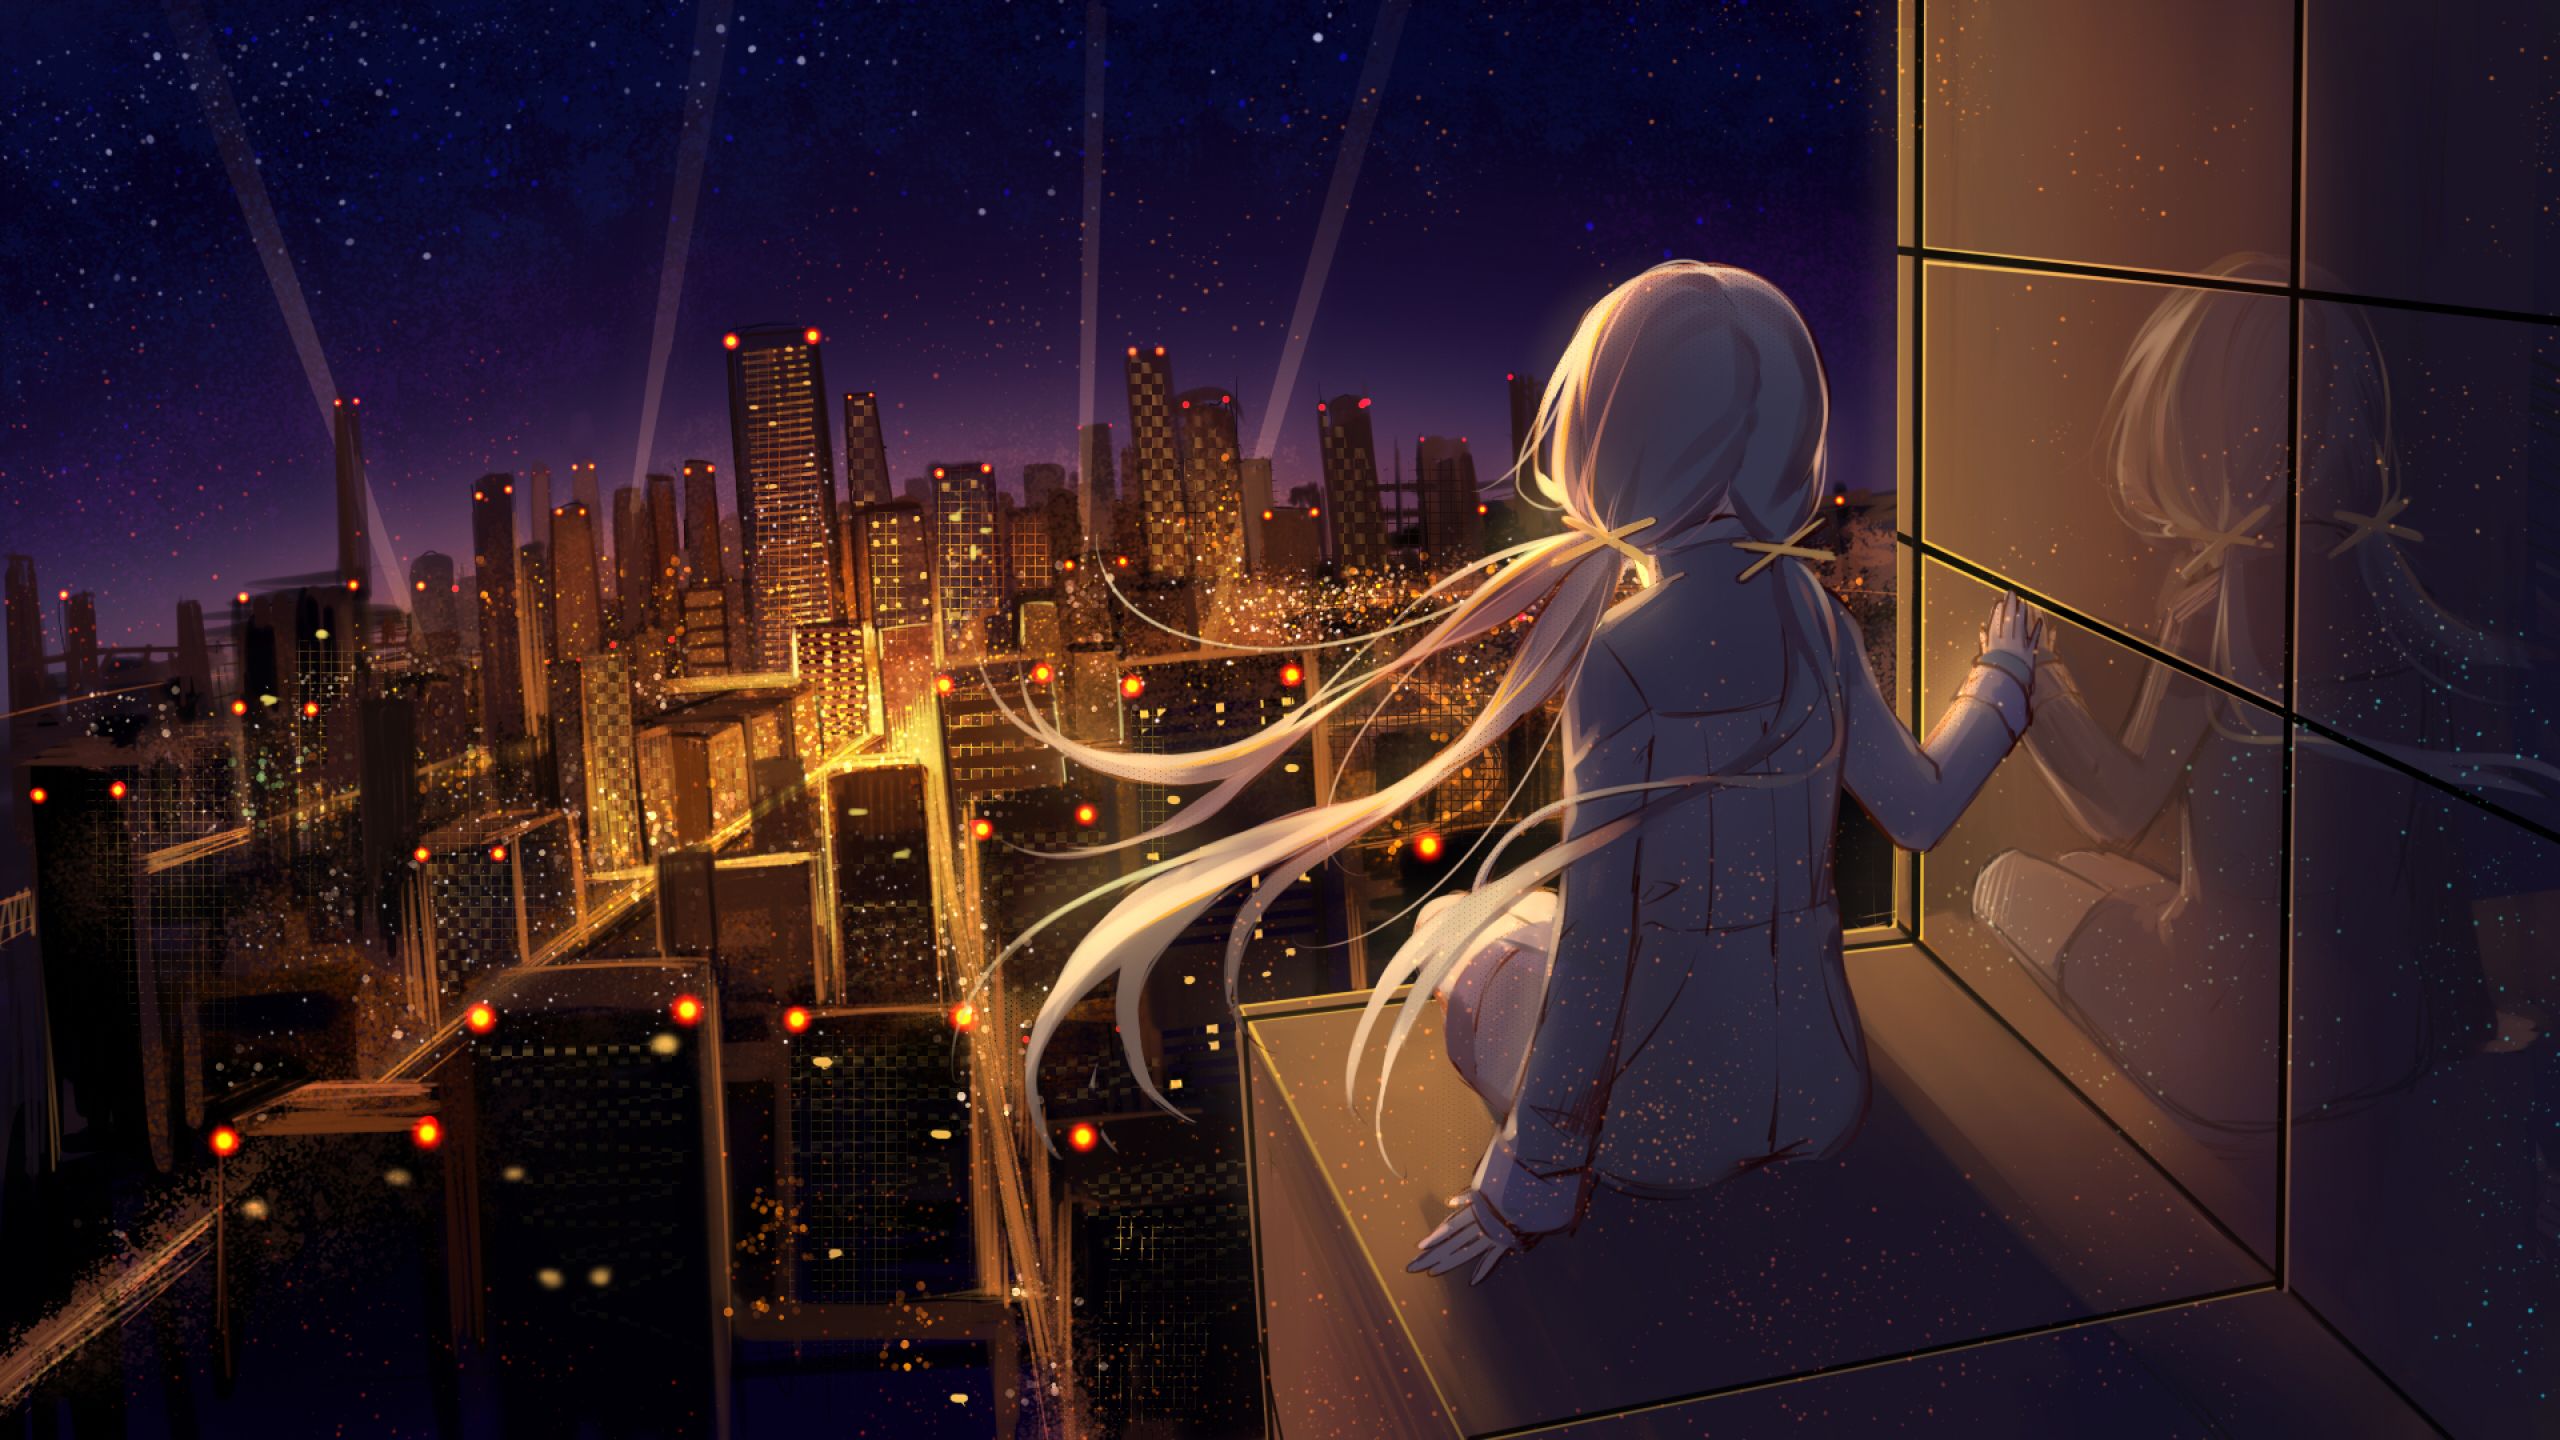 Anime Girl Looking at Stars 1440P Resolution Wallpaper